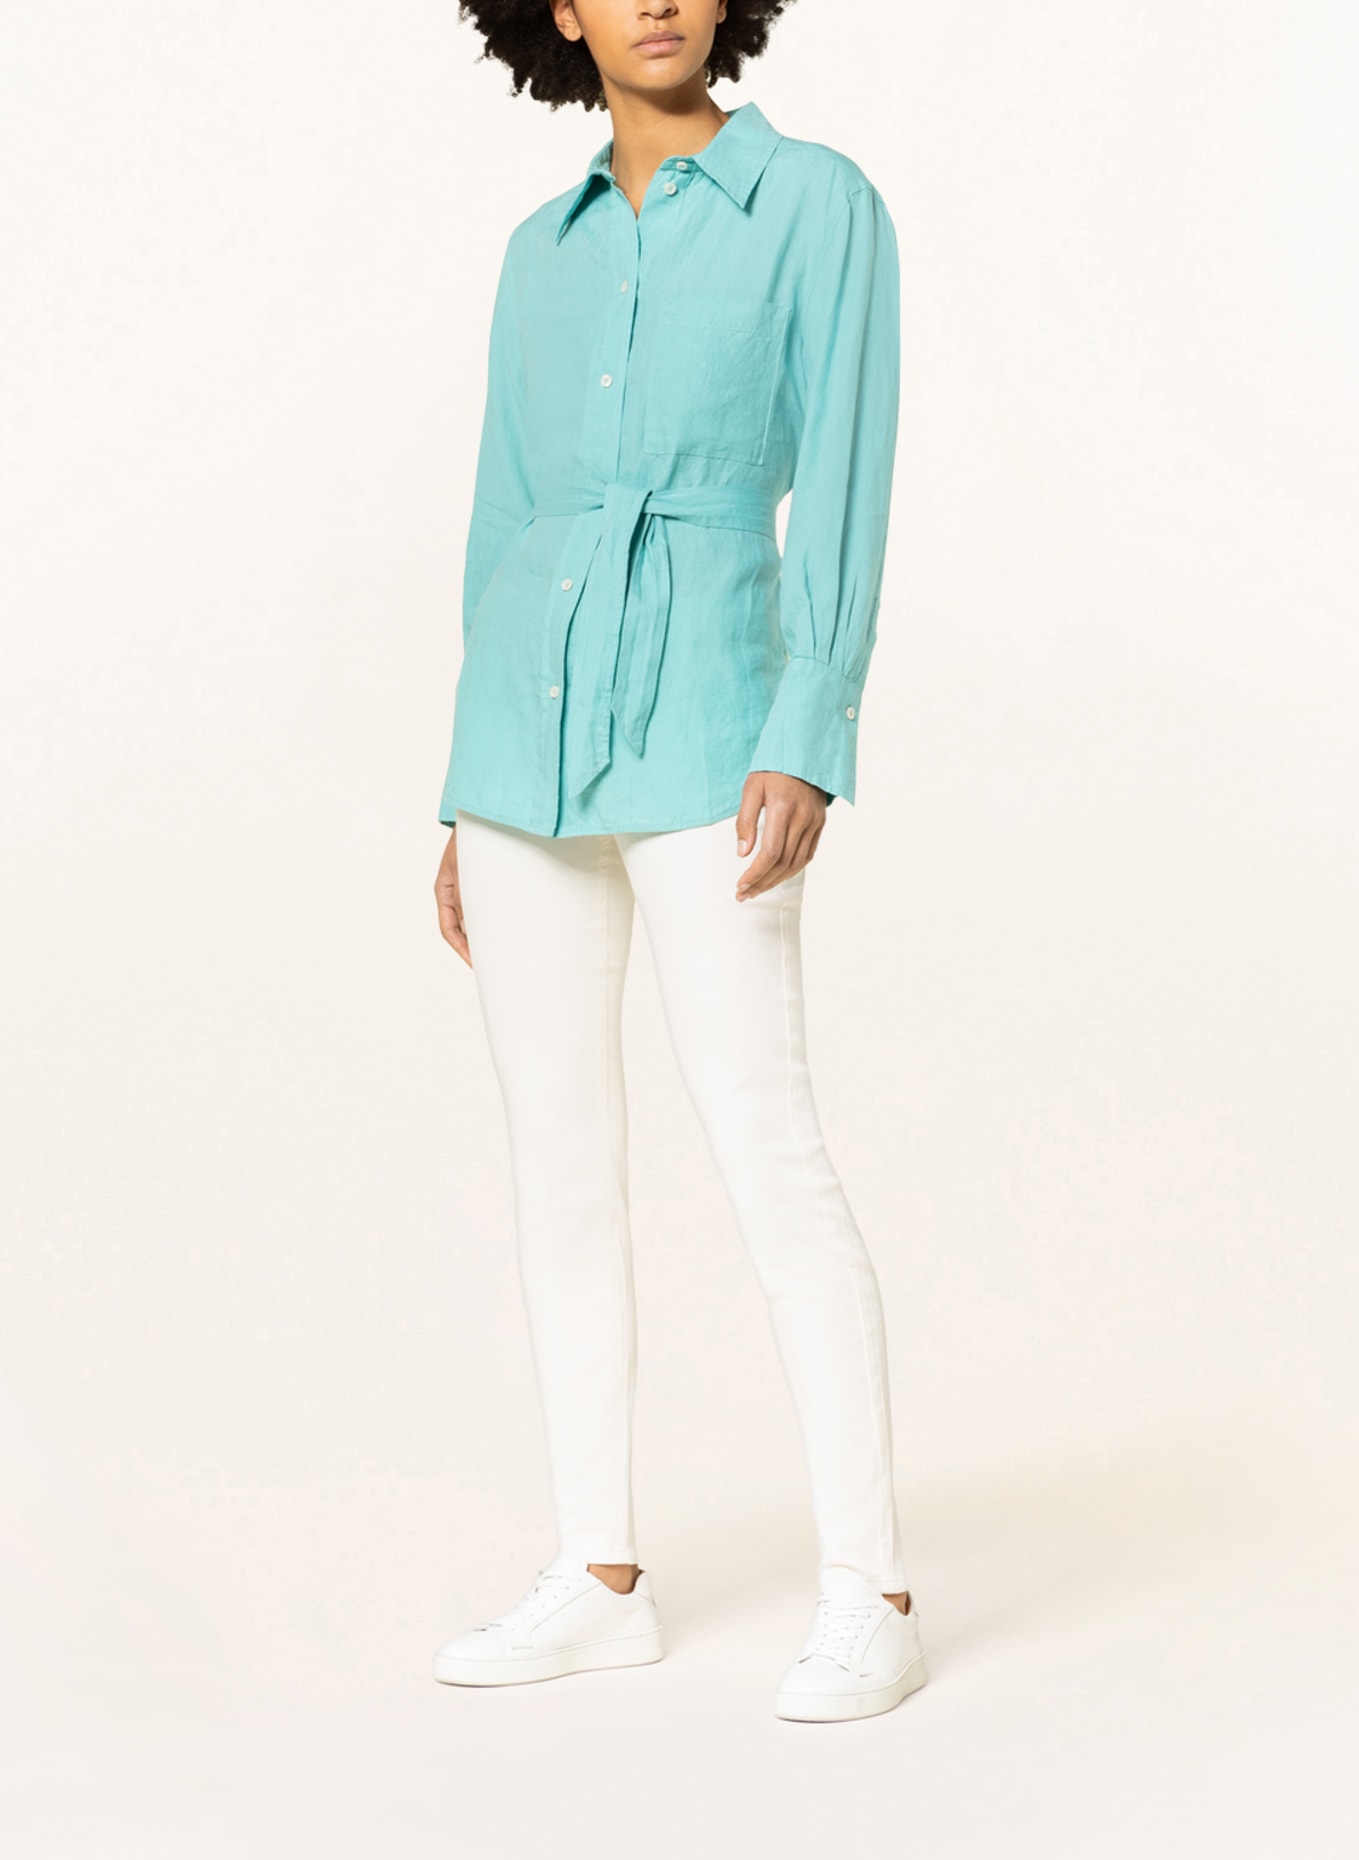 Marc O'Polo Shirt blouse made of linen , Color: TURQUOISE (Image 2)